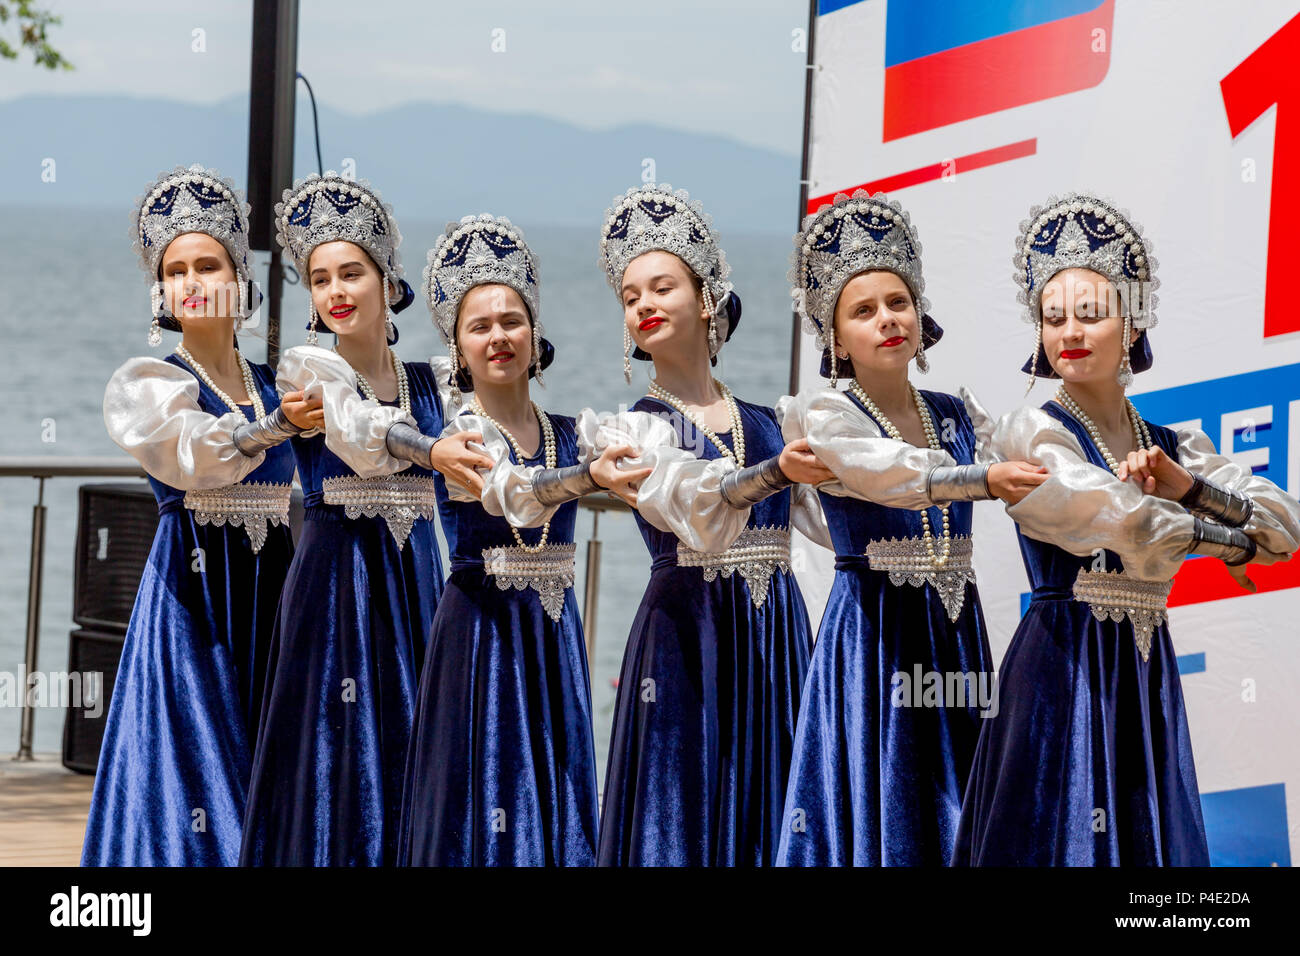 Russia Vladivostok 06 12 2018 Beautiful Ladies In Traditional Russian Costumes Perform On